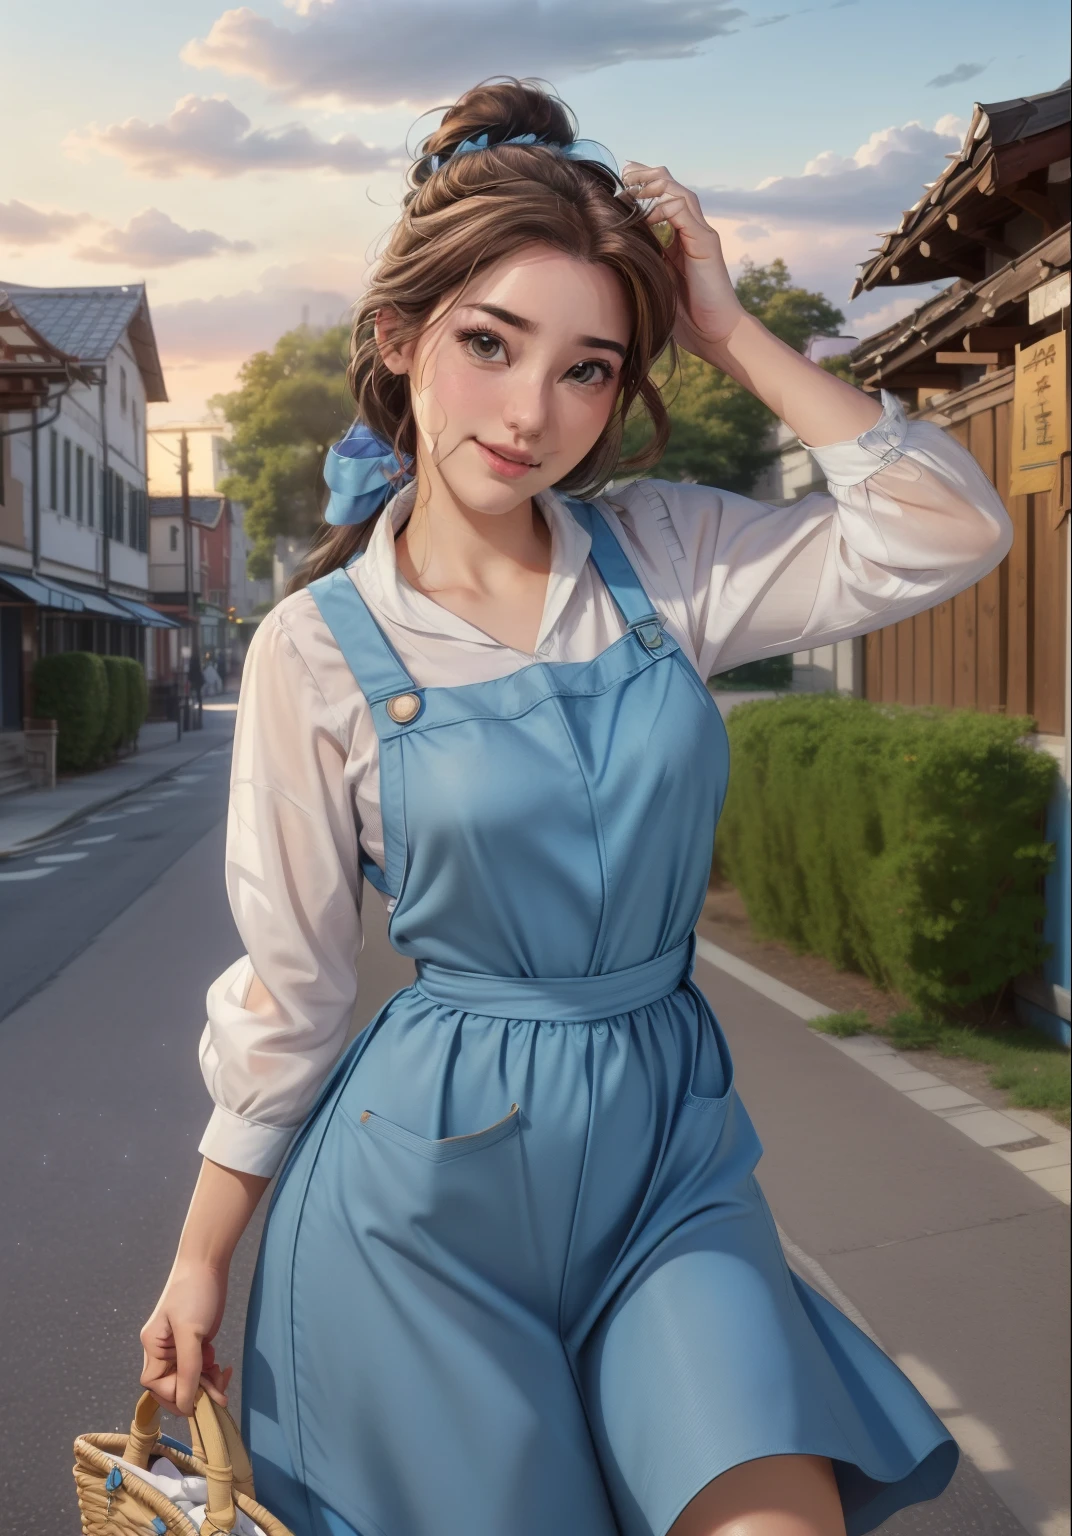 (Belle Waif:1), smile, cute, cute pose, View Viewer, Thick thighs, (Blue clothes, apron:1.2), (Hair Bun, Hair Ribbon), :d, Holding a basket, walk,
cormorant
(Realistic:1.2), (Realism), (masterpiece:1.2), (highest quality), (Super detailed), (8k, 4K, Complex),(Full Body Shot:1),(Cowboy Shot:1.2), (85mm),Particles of light, Lighting, (Very detailedな:1.2),(Detailed face:1.2), (Gradation), SFW, colorful,(Fine grain:1.2),

(Detailed landscape, old Town, building, shop, fruit:1.2),(Detailed Background),Detailed landscape, (Dynamic Angle:1.2), (Dynamic pose:1.2), (The rule of thirds_composition:1.3), (Course of action:1.2), Wide Shot, dawn, alone,

 （8k，RAW Photos），（Best Quality），（Masterpiece Loose），（Realistic，）（Realistic），（High resolution），Hyper Detail，（ヘンテル・Realism：1.1），Beautiful Face， （1 Female：1.1），High resolution), (8k), (Very detailed), (4K), (Pixiv), Perfect Face, Beautiful eyes and face, (highest quality), (Very detailed), Detailed faceと目, (alone), Textured skin, absurdes, High resolution, (Dynamic Angle:1.3) (Dynamic Pose:1.3)